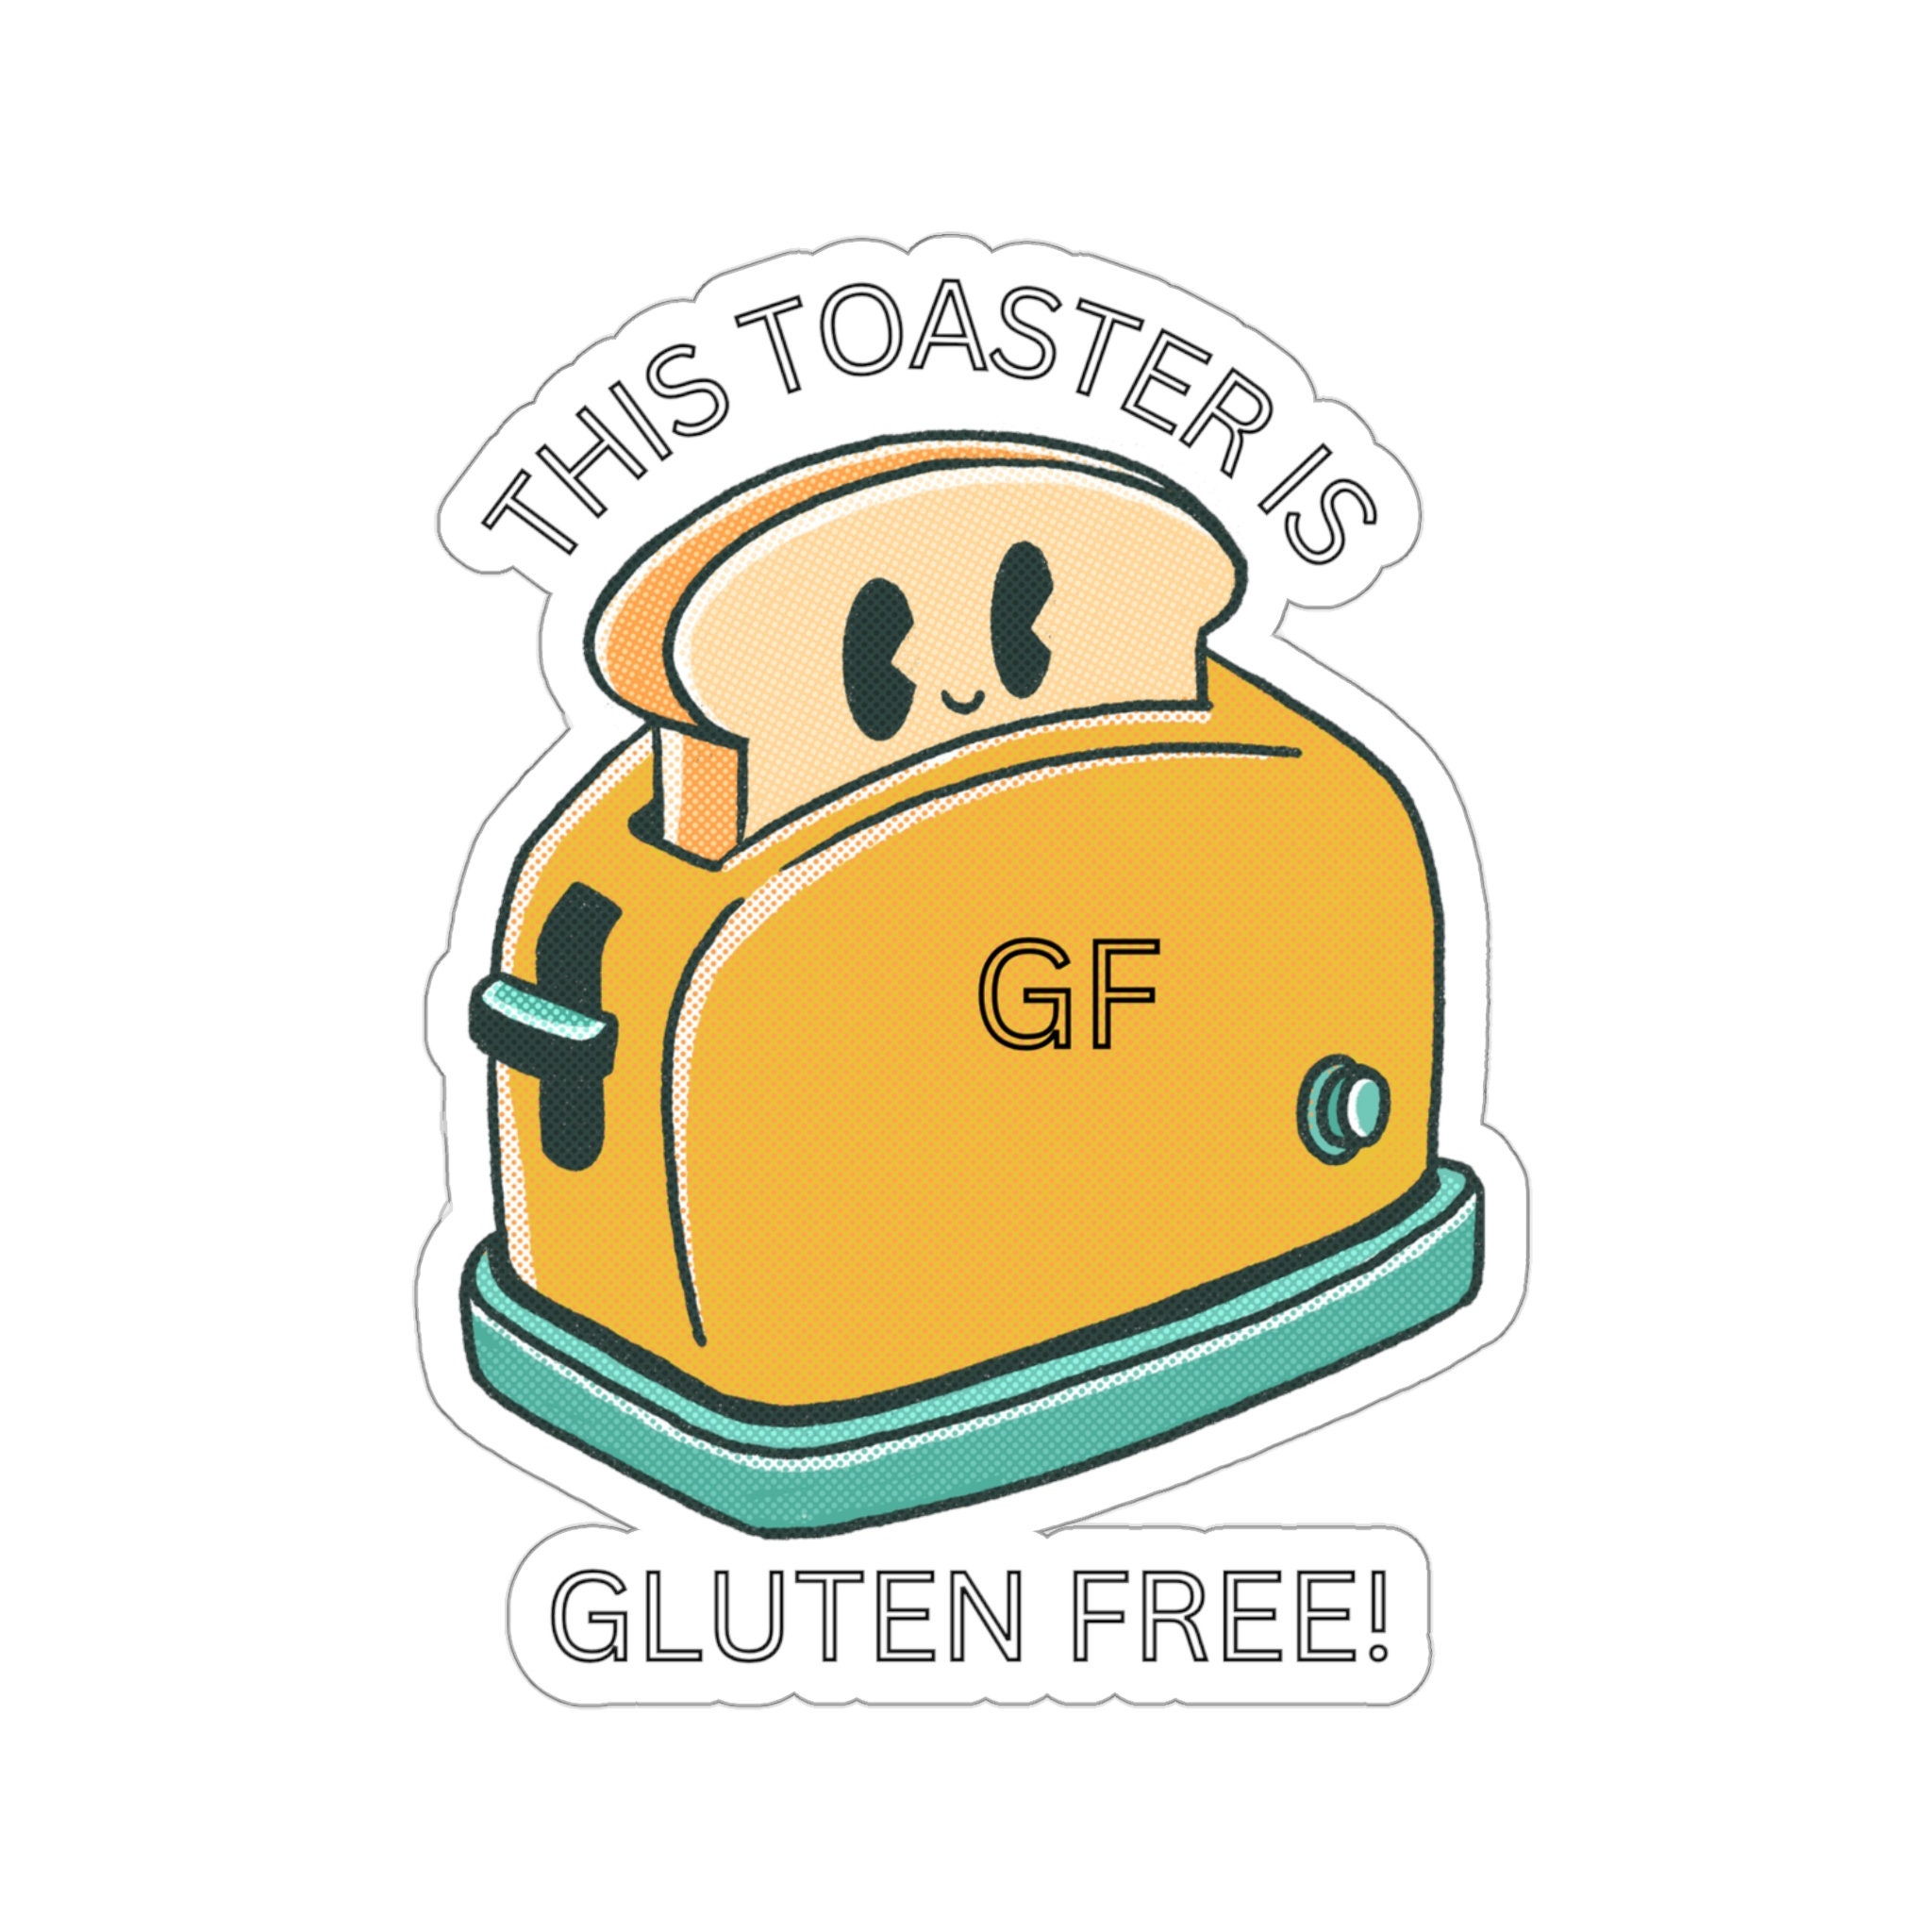 Gluten Free Toaster Kiss-cut Stickers Multiple Sizes 